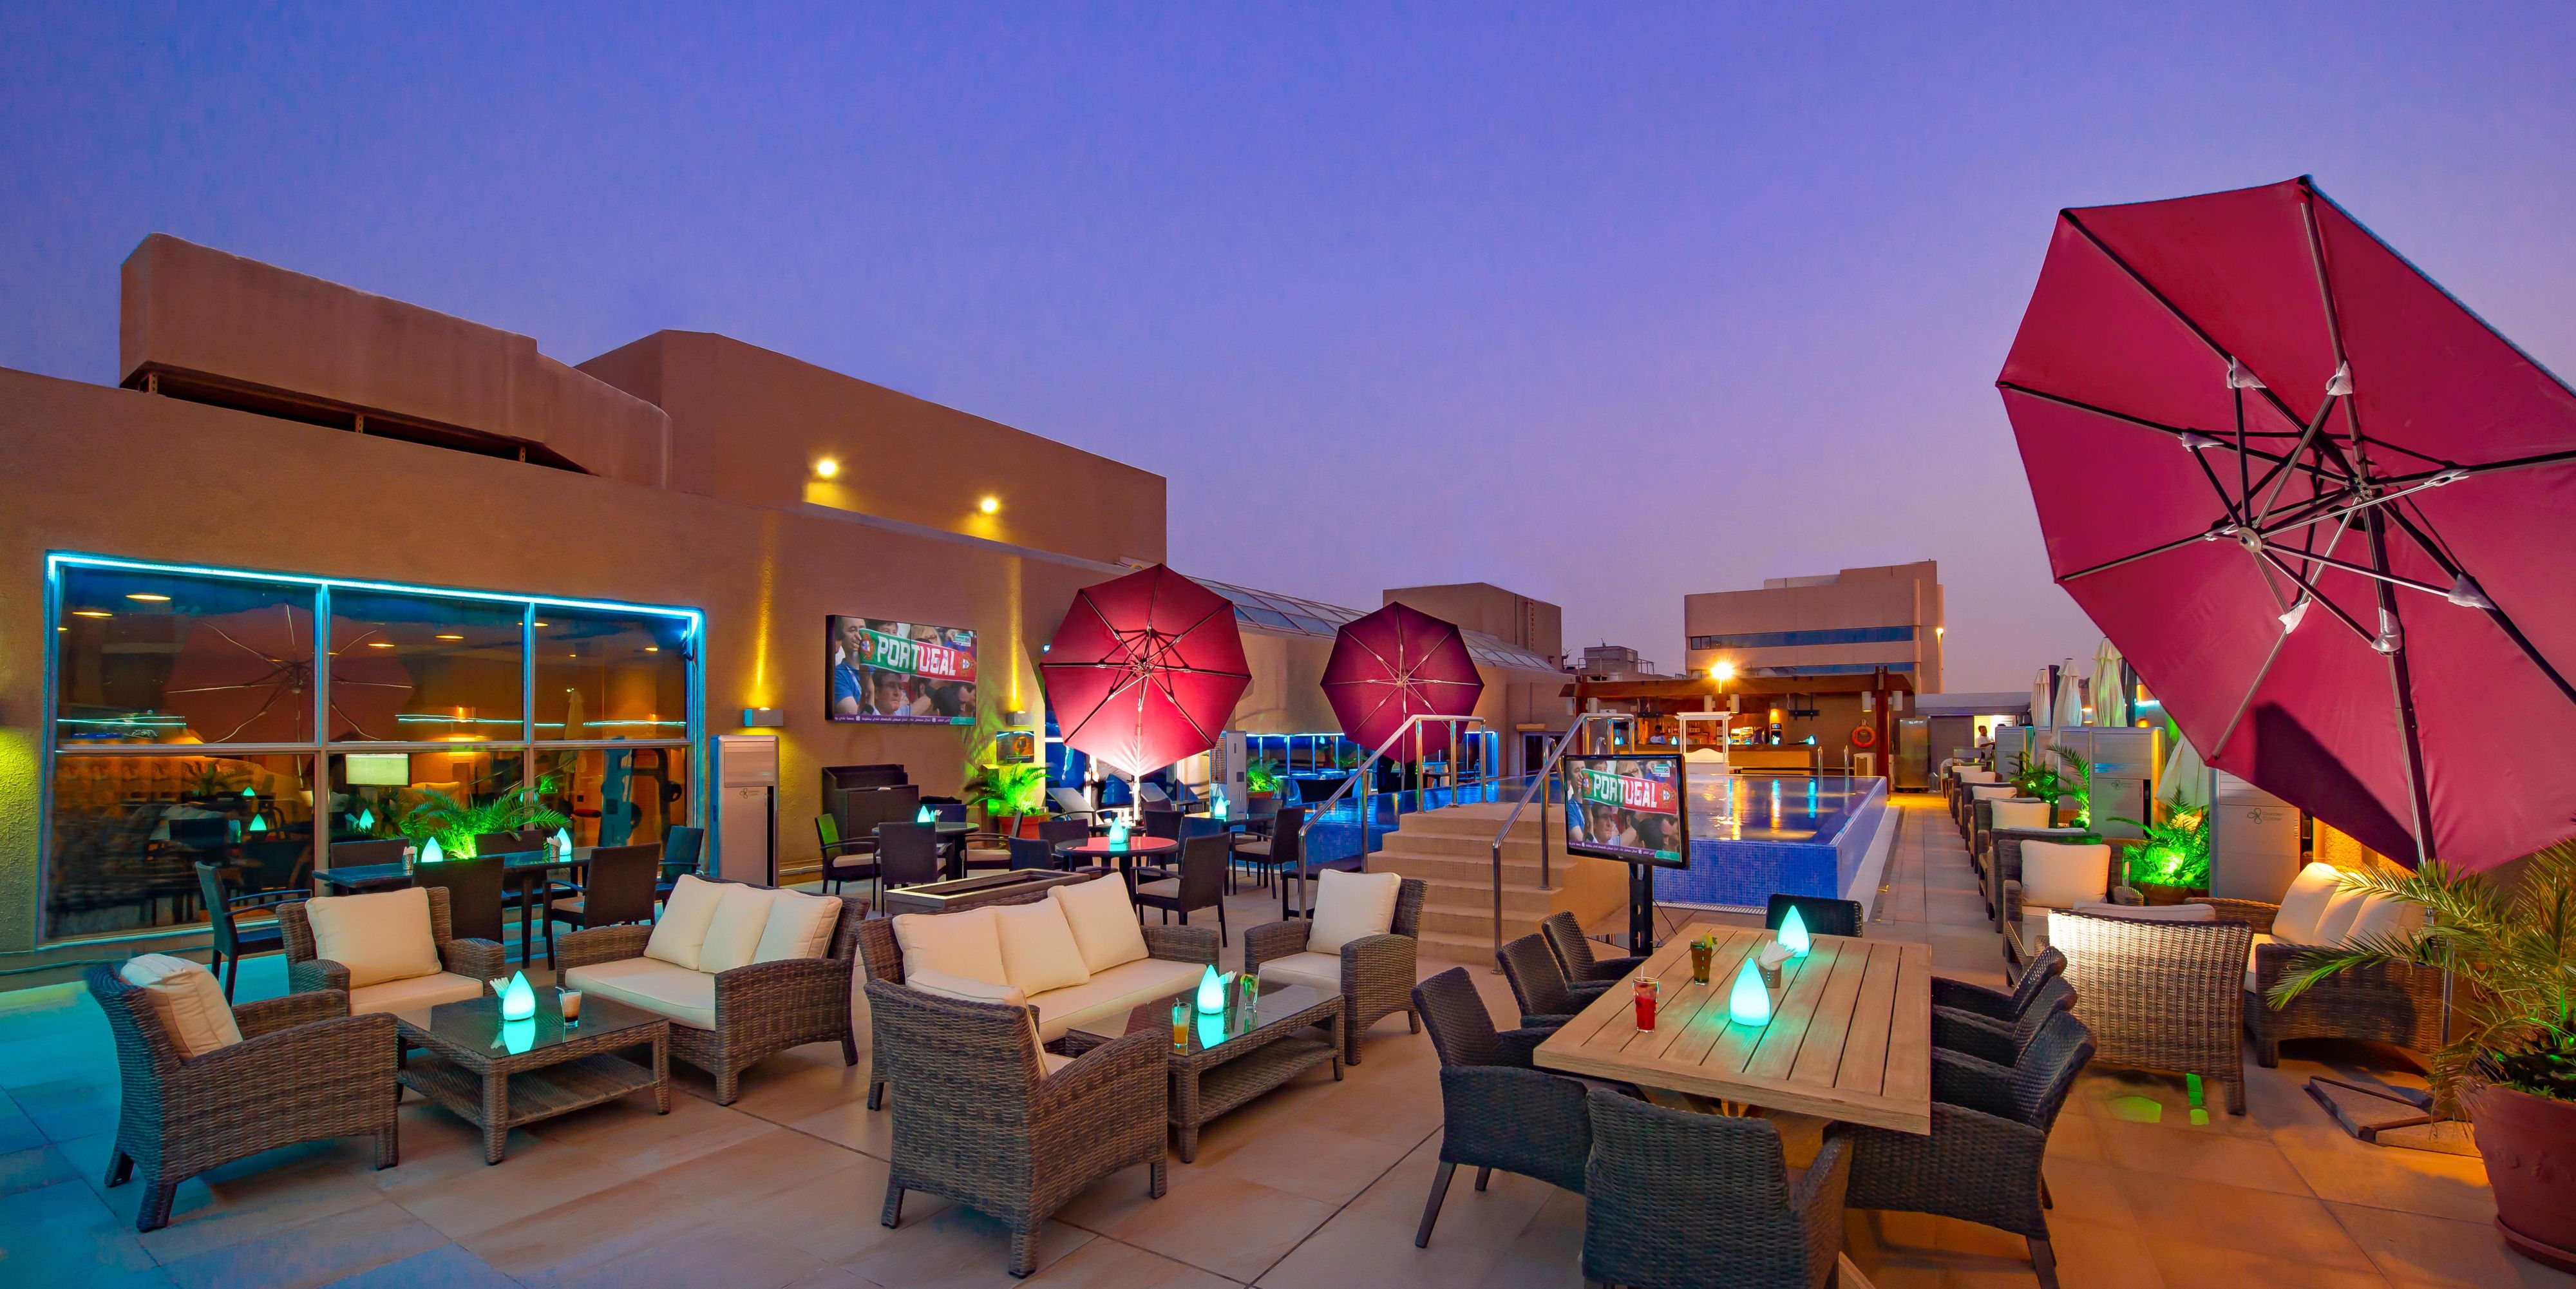 Experience our newly launched rooftop Shisha Lounge. Take advantage of this beautiful weather and sit by the pool or in the comfort and warmth of our indoor space with shisha while listening to the melodious tunes of the Duo band.